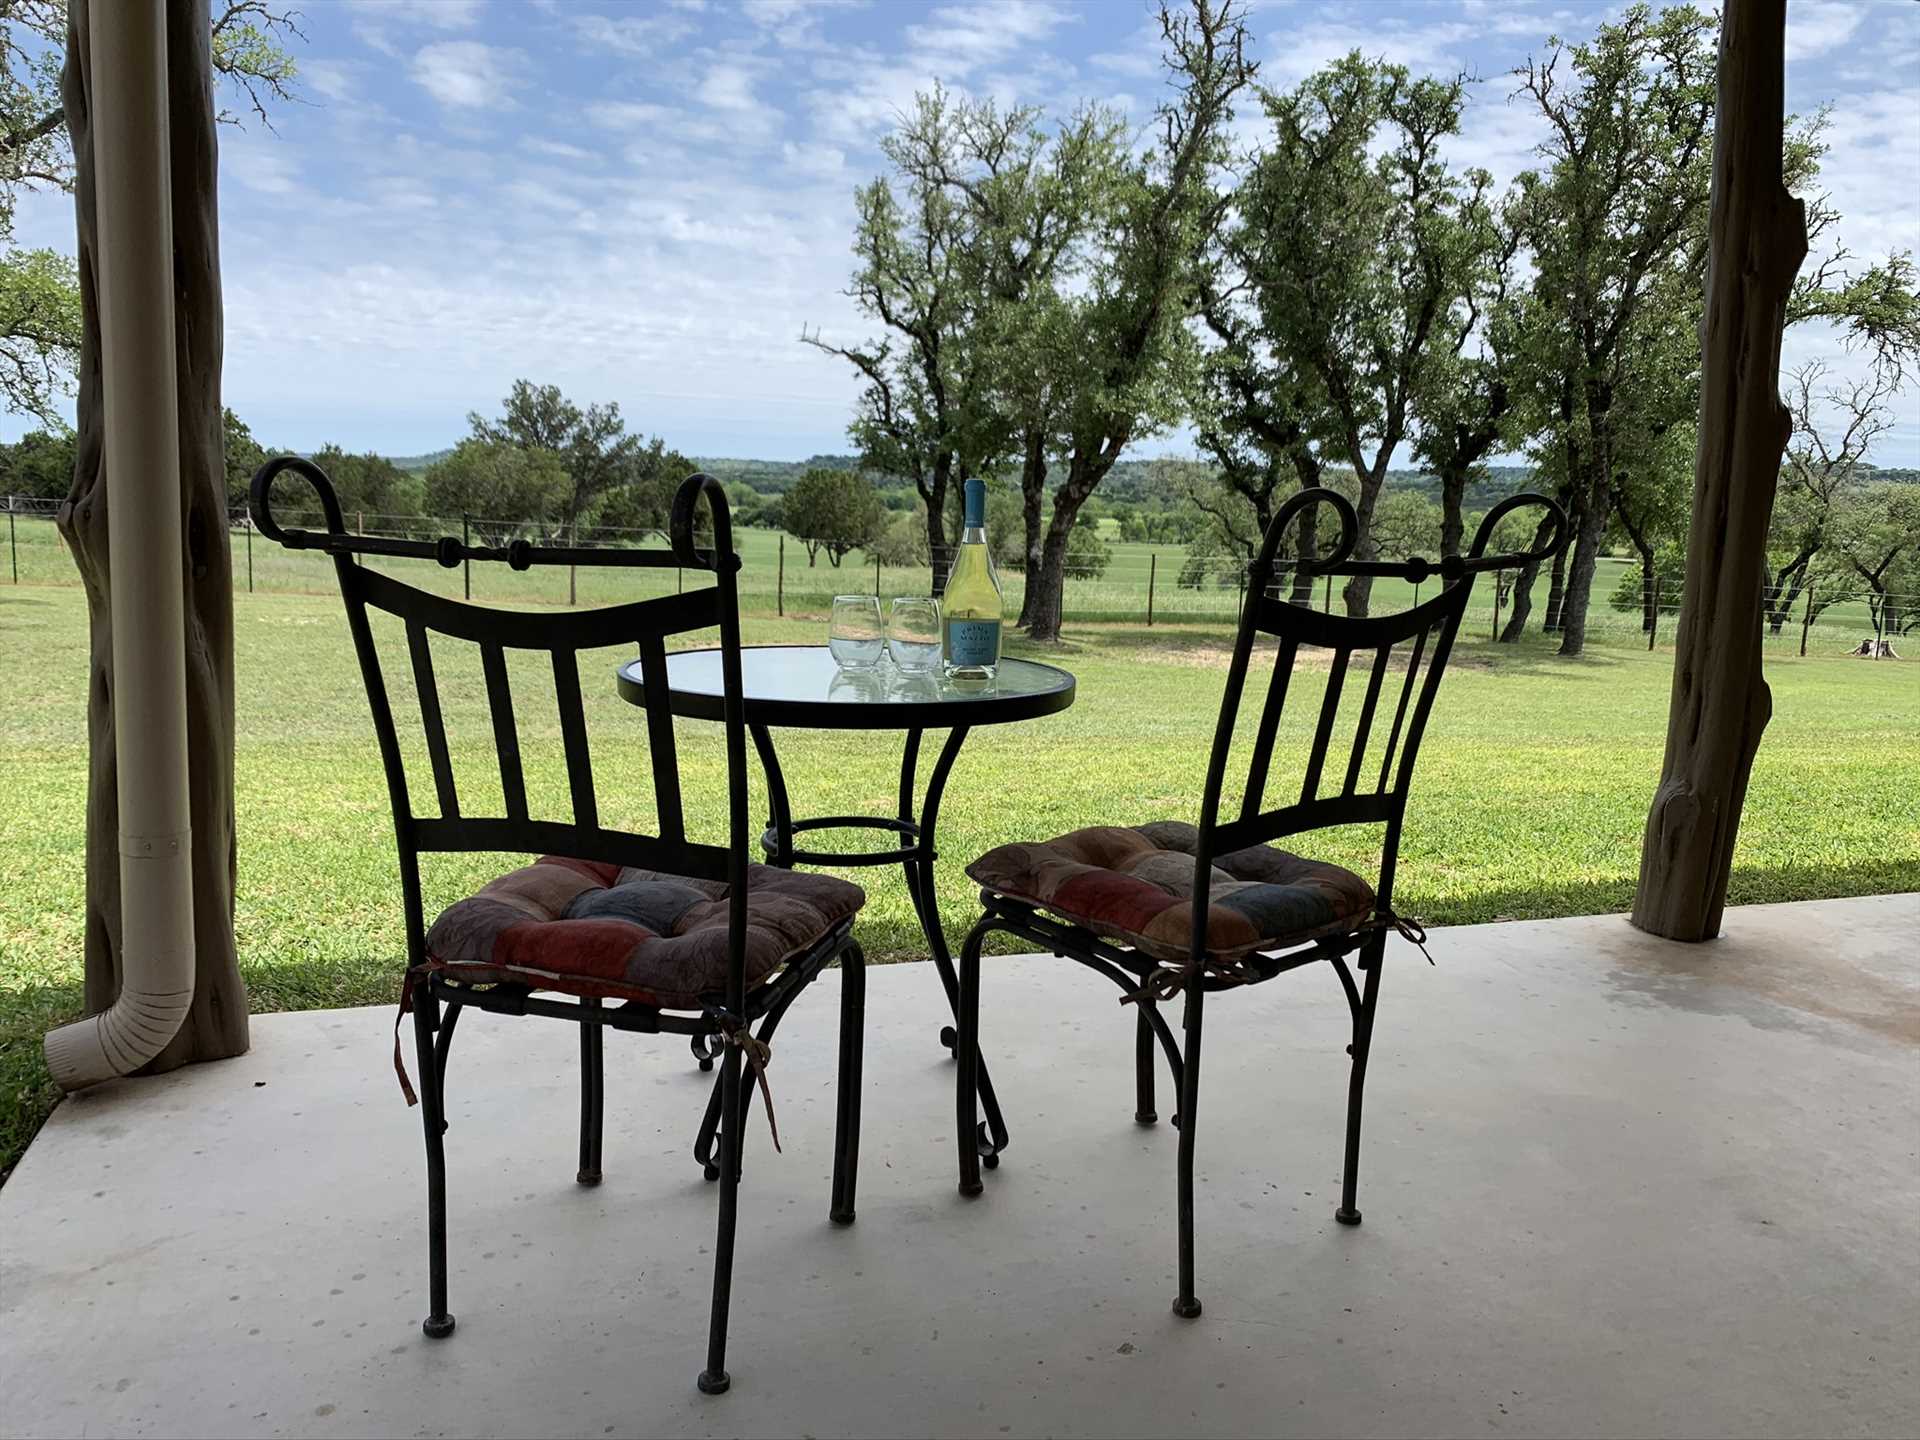                                                 You're welcome to hike the grounds, of course-but you won't even need to leave the patio for beautiful Hill Country views!